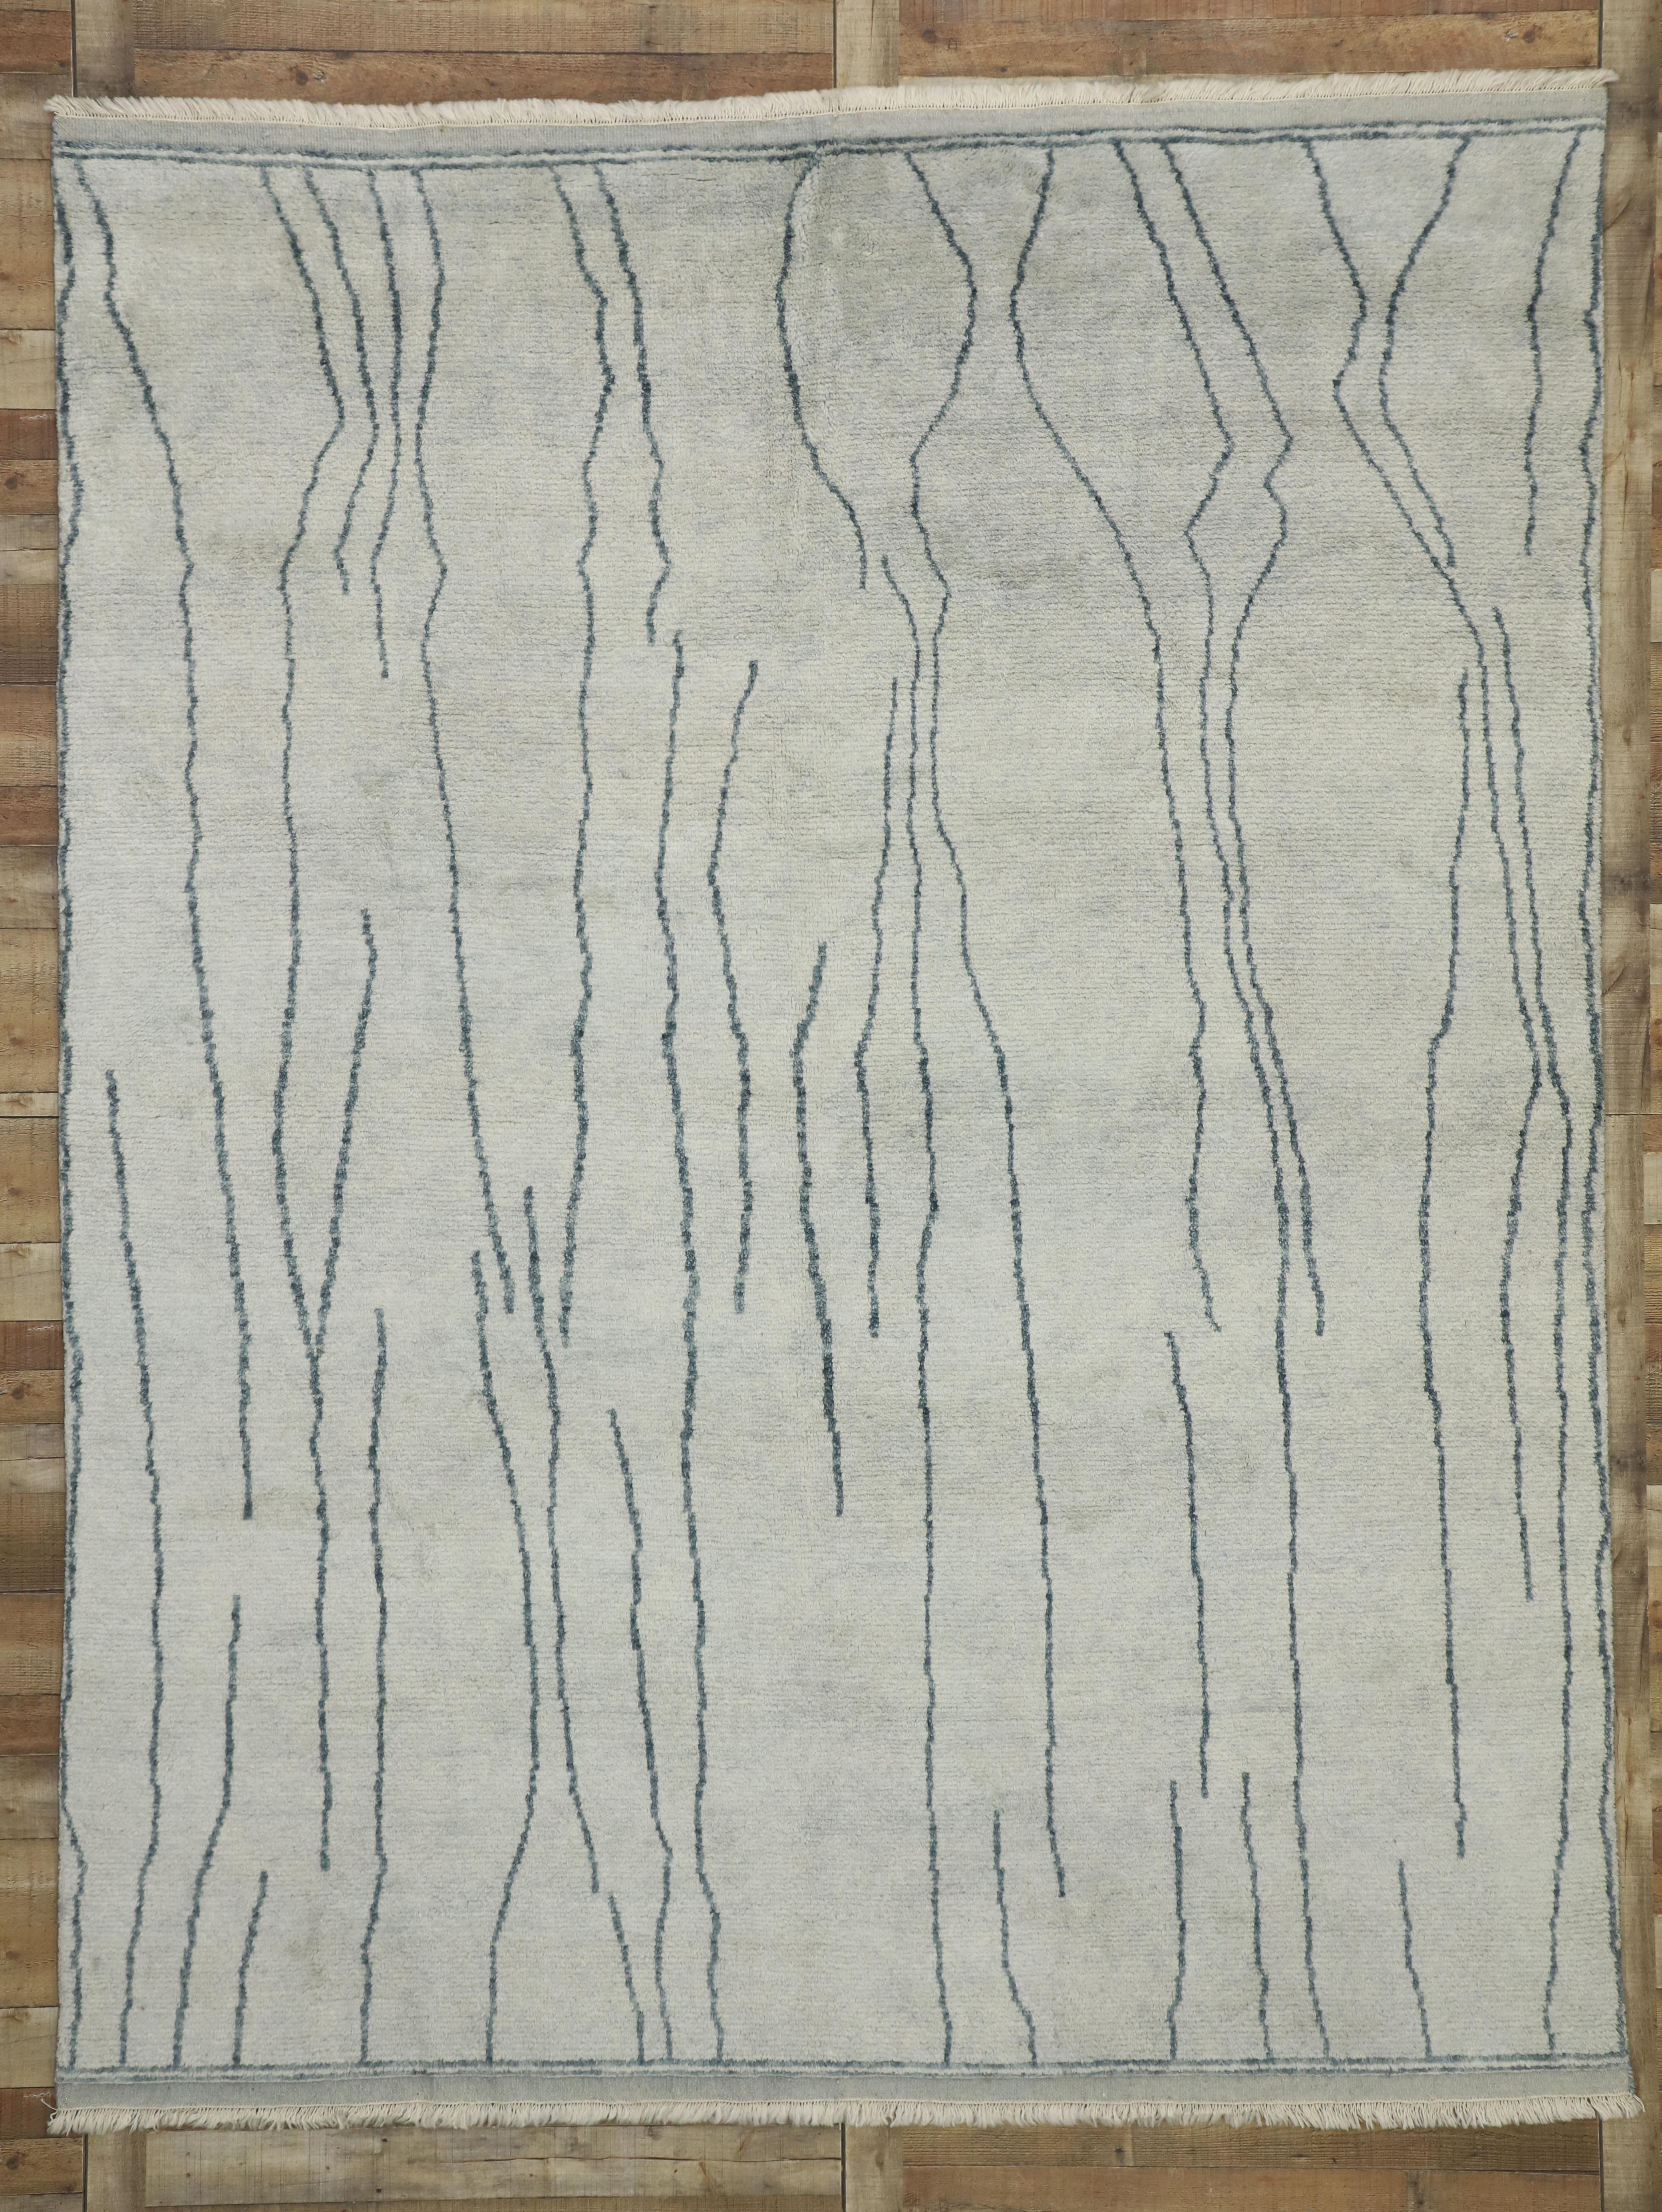 New Contemporary Moroccan Area Rug with Linear Design 1